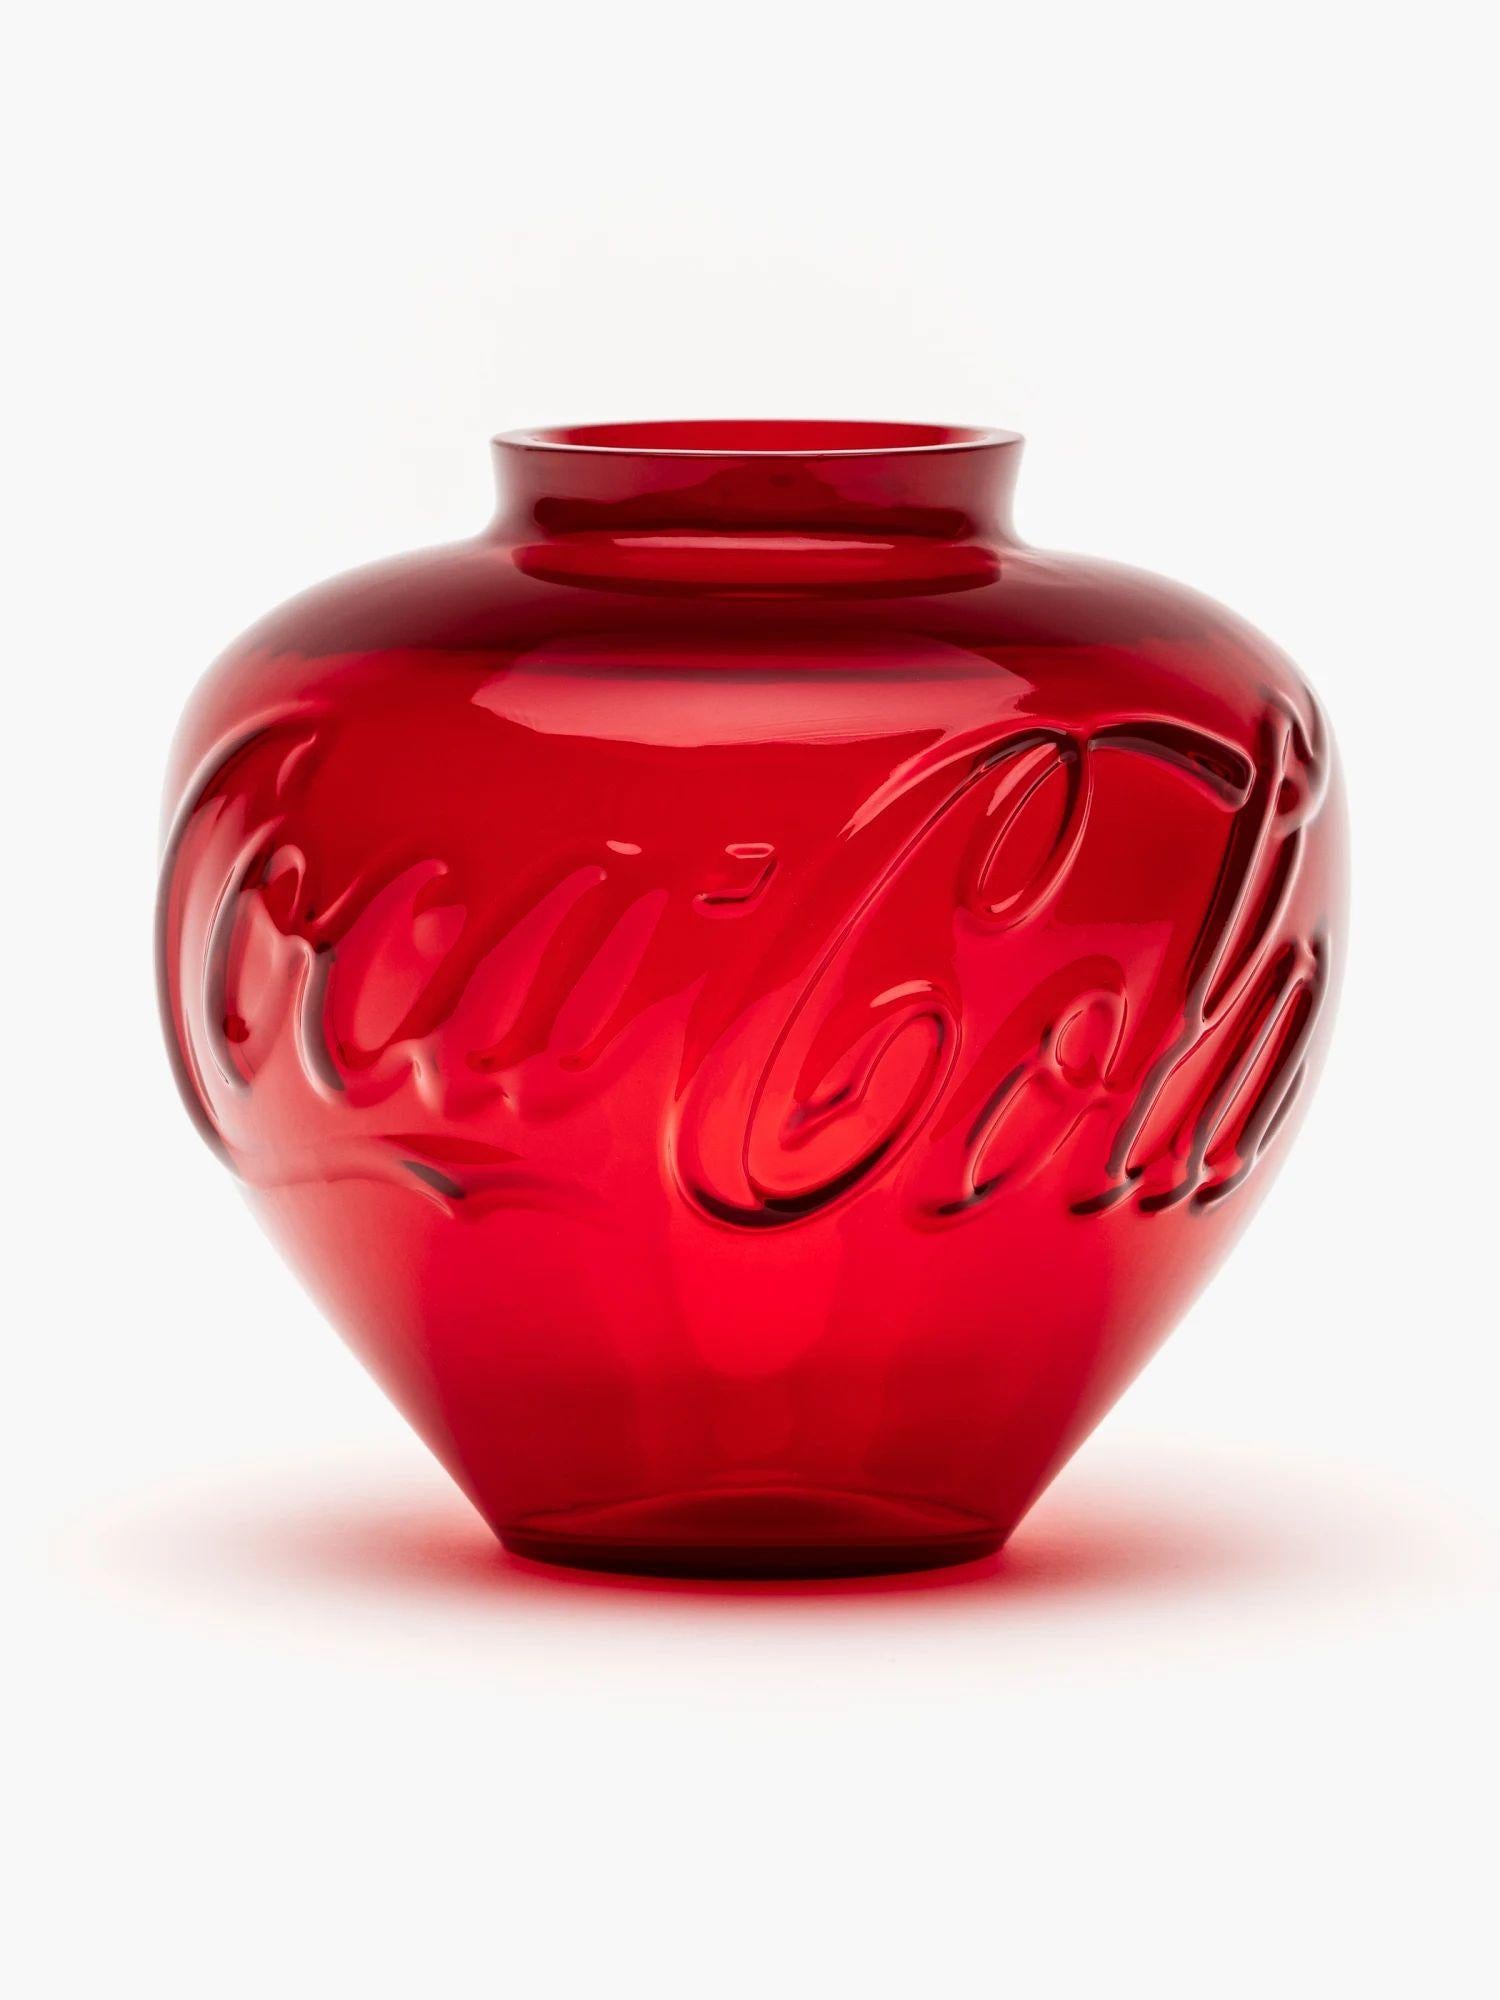 Untitled (Coca Cola) By AI Weiwei